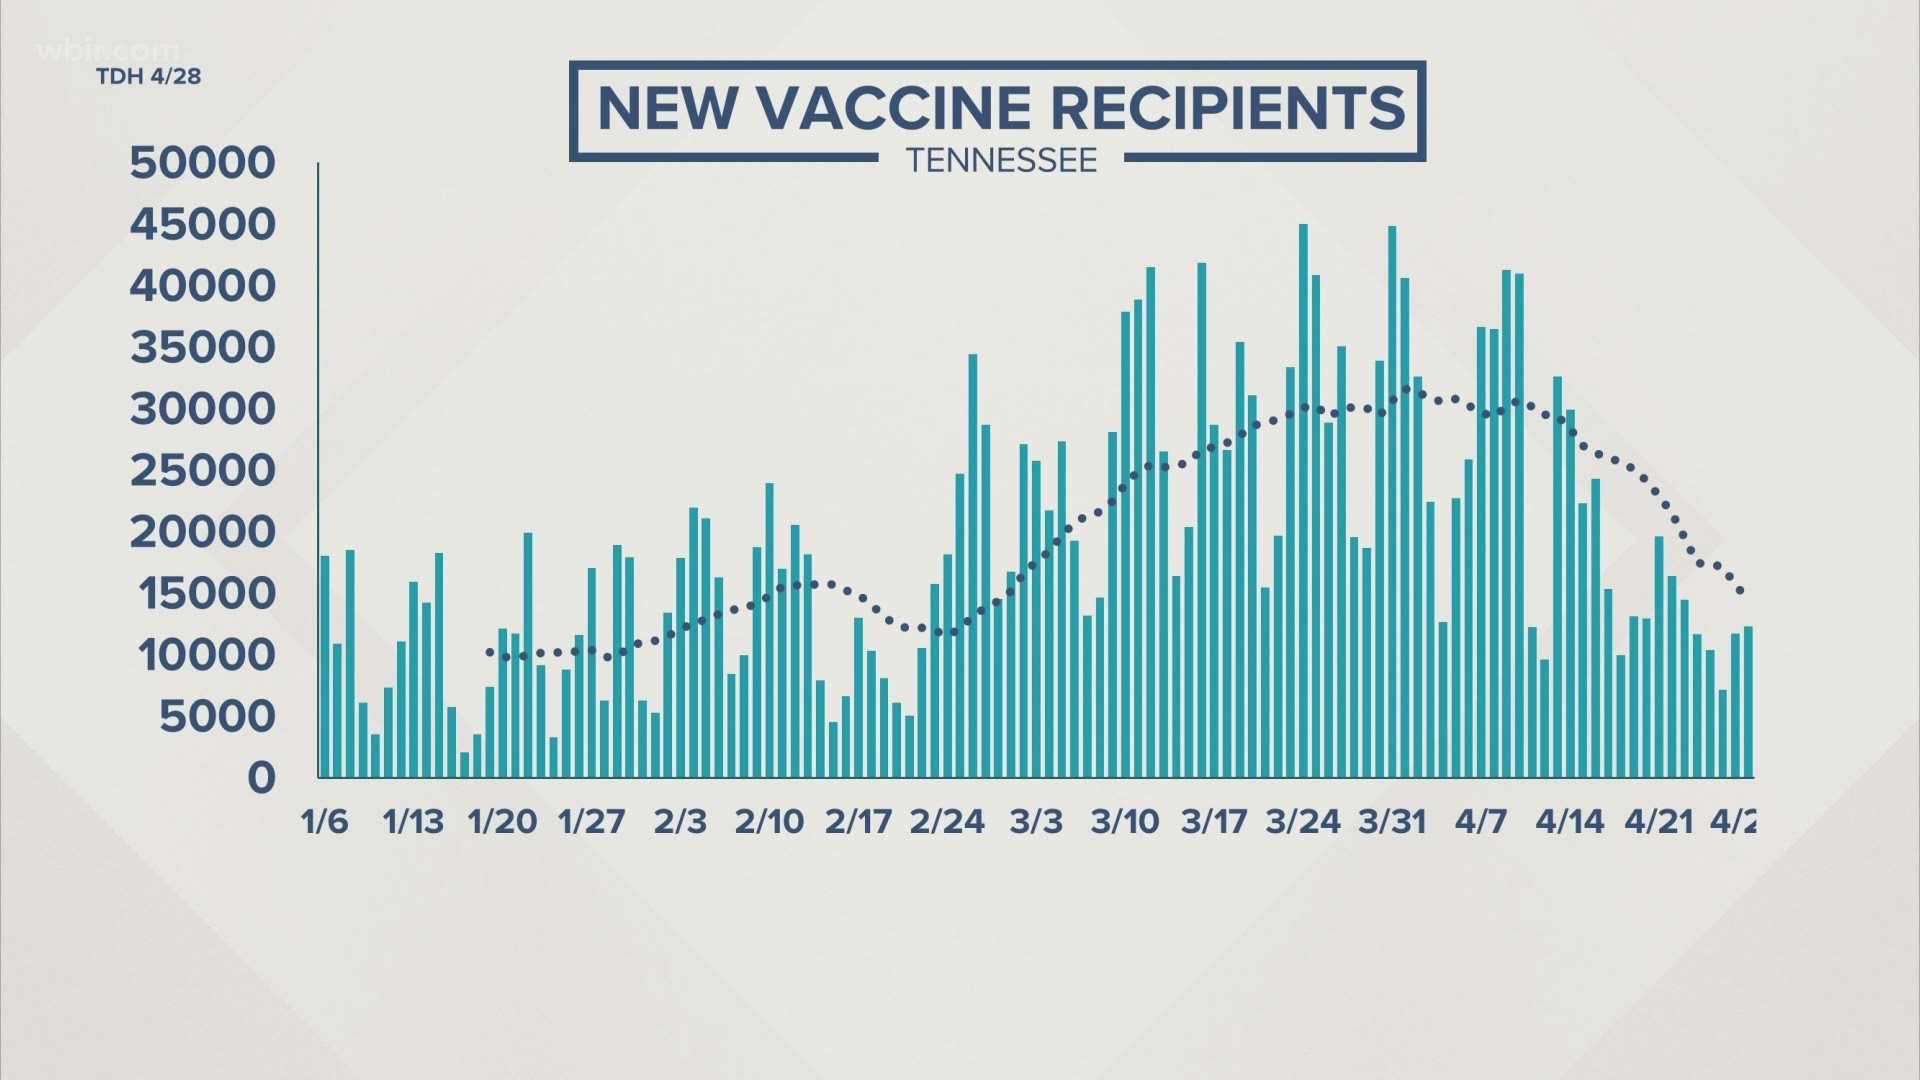 In Tennessee, demand for COVID-19 vaccinations is down more than 50%, and just 1 in 4 young adults received at least one dose.